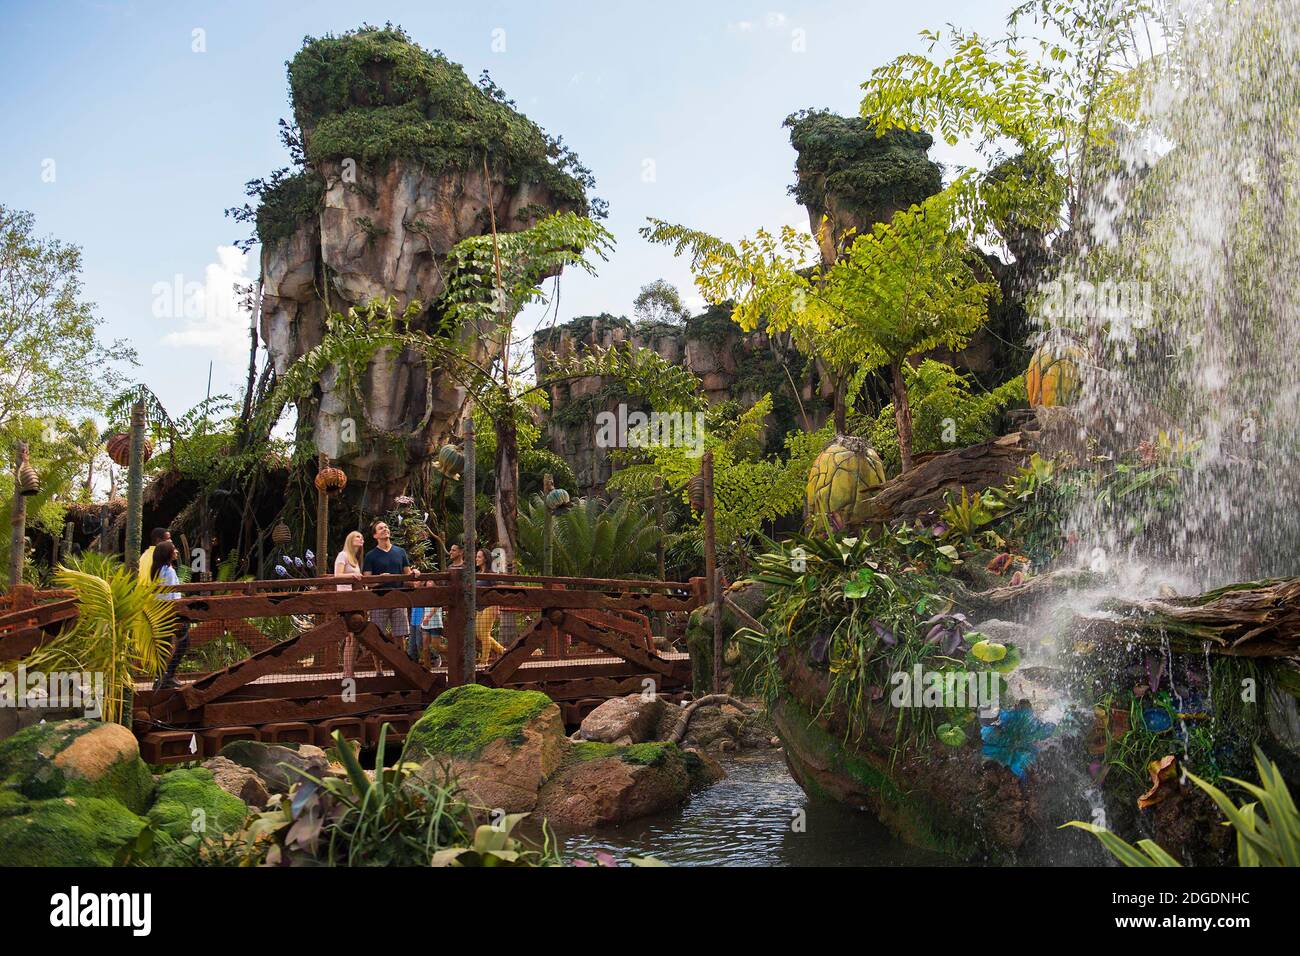 Hand out photo - Pandora - The World of Avatar at Disney's Animal Kingdom  brings a variety of experiences to the park, including the family friendly  Na'vi River Journey attraction, the thrilling